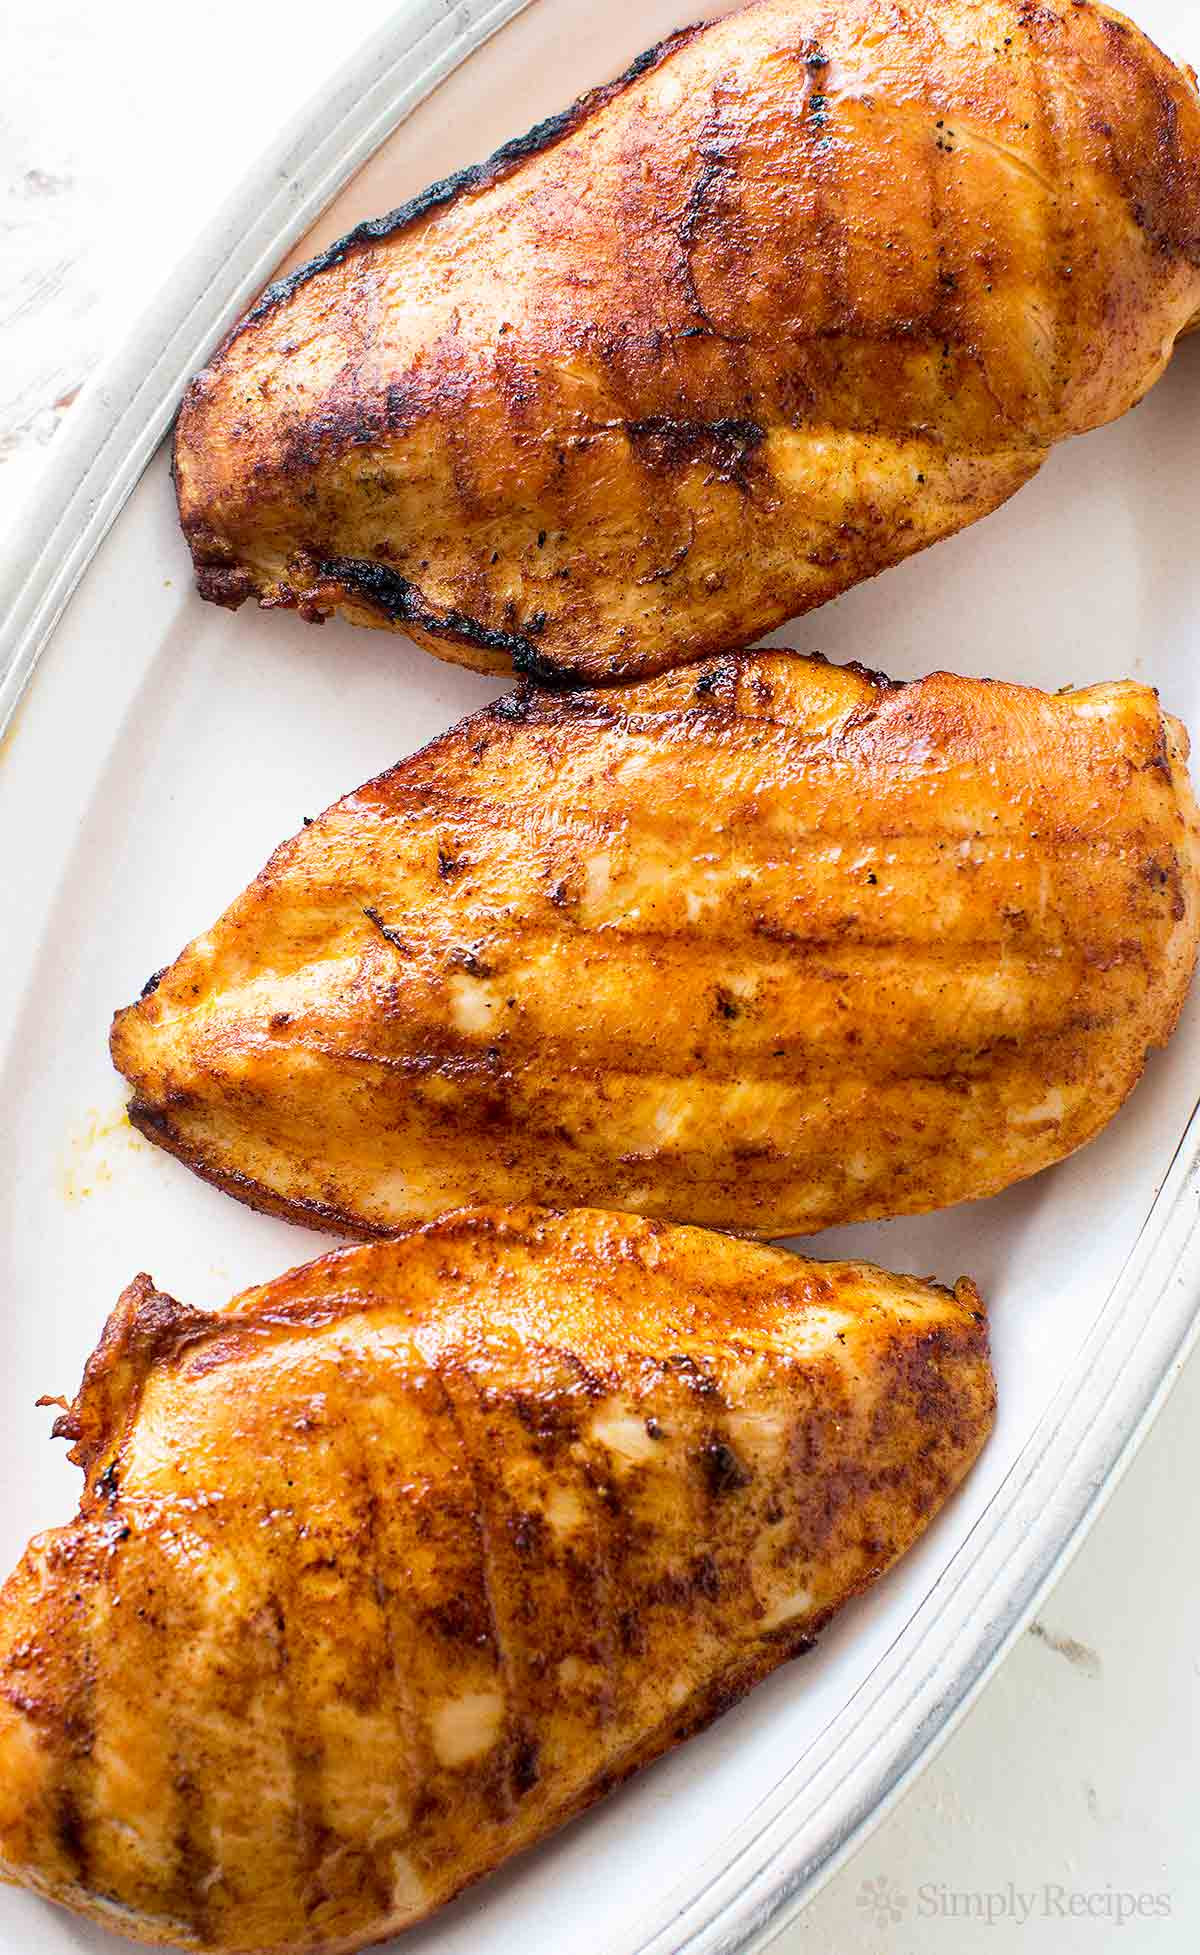 Fried Boneless Chicken Breast
 How to Grill Juicy Boneless Skinless Chicken Breasts